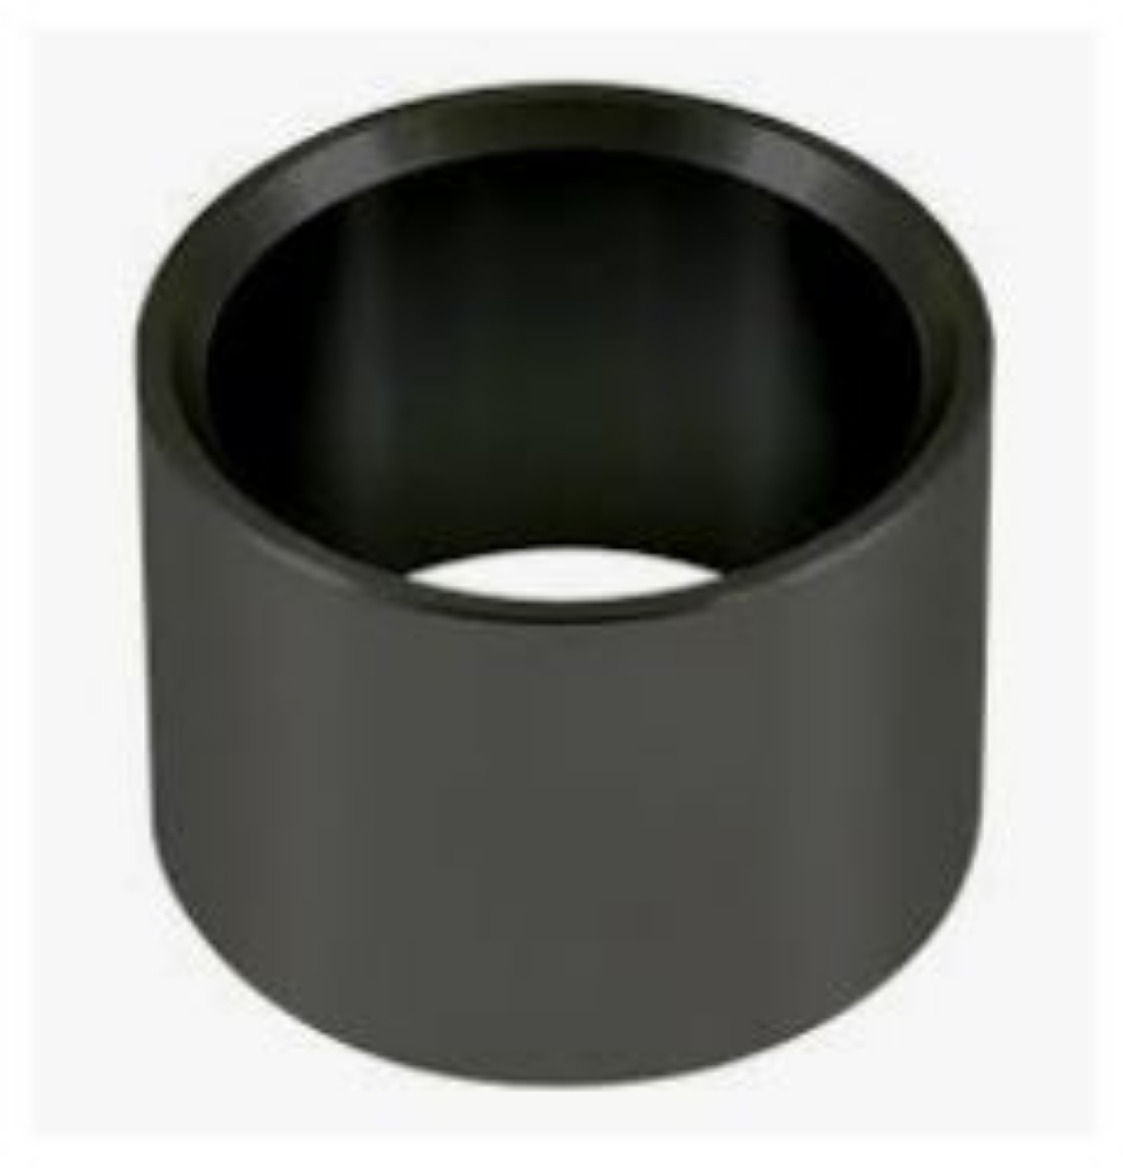 Picture of RINGFEDER TOW EYE BUSH 50MM STANDARD 60.3MM OD